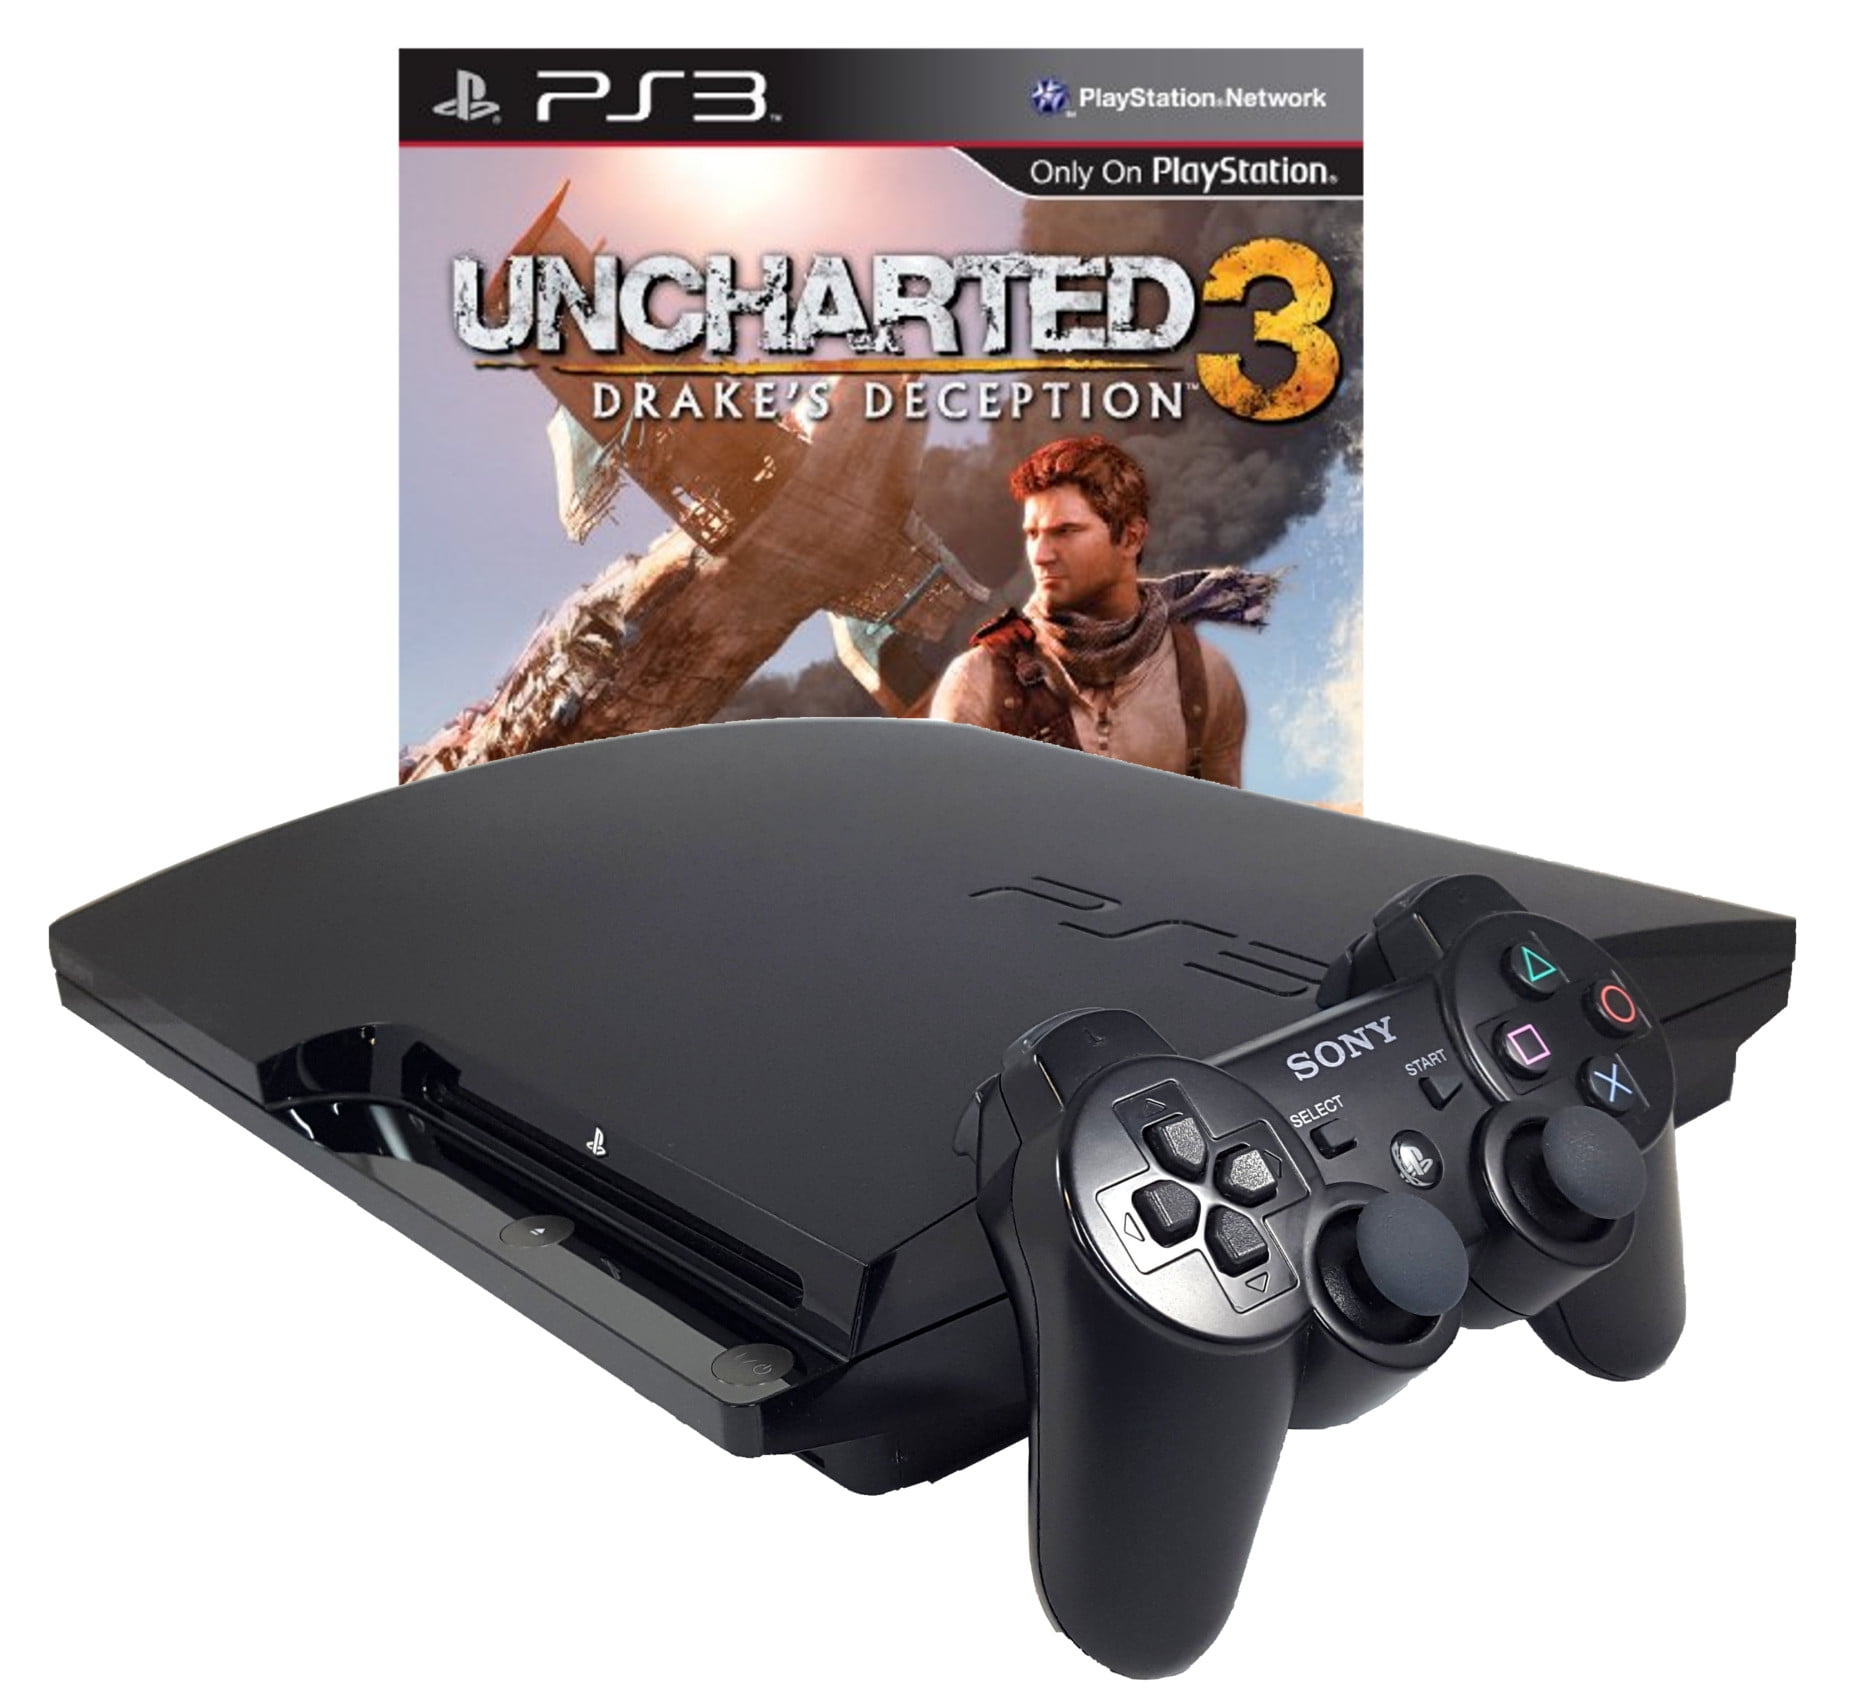 Uncharted 3: Drake's Deception - Playstation 3